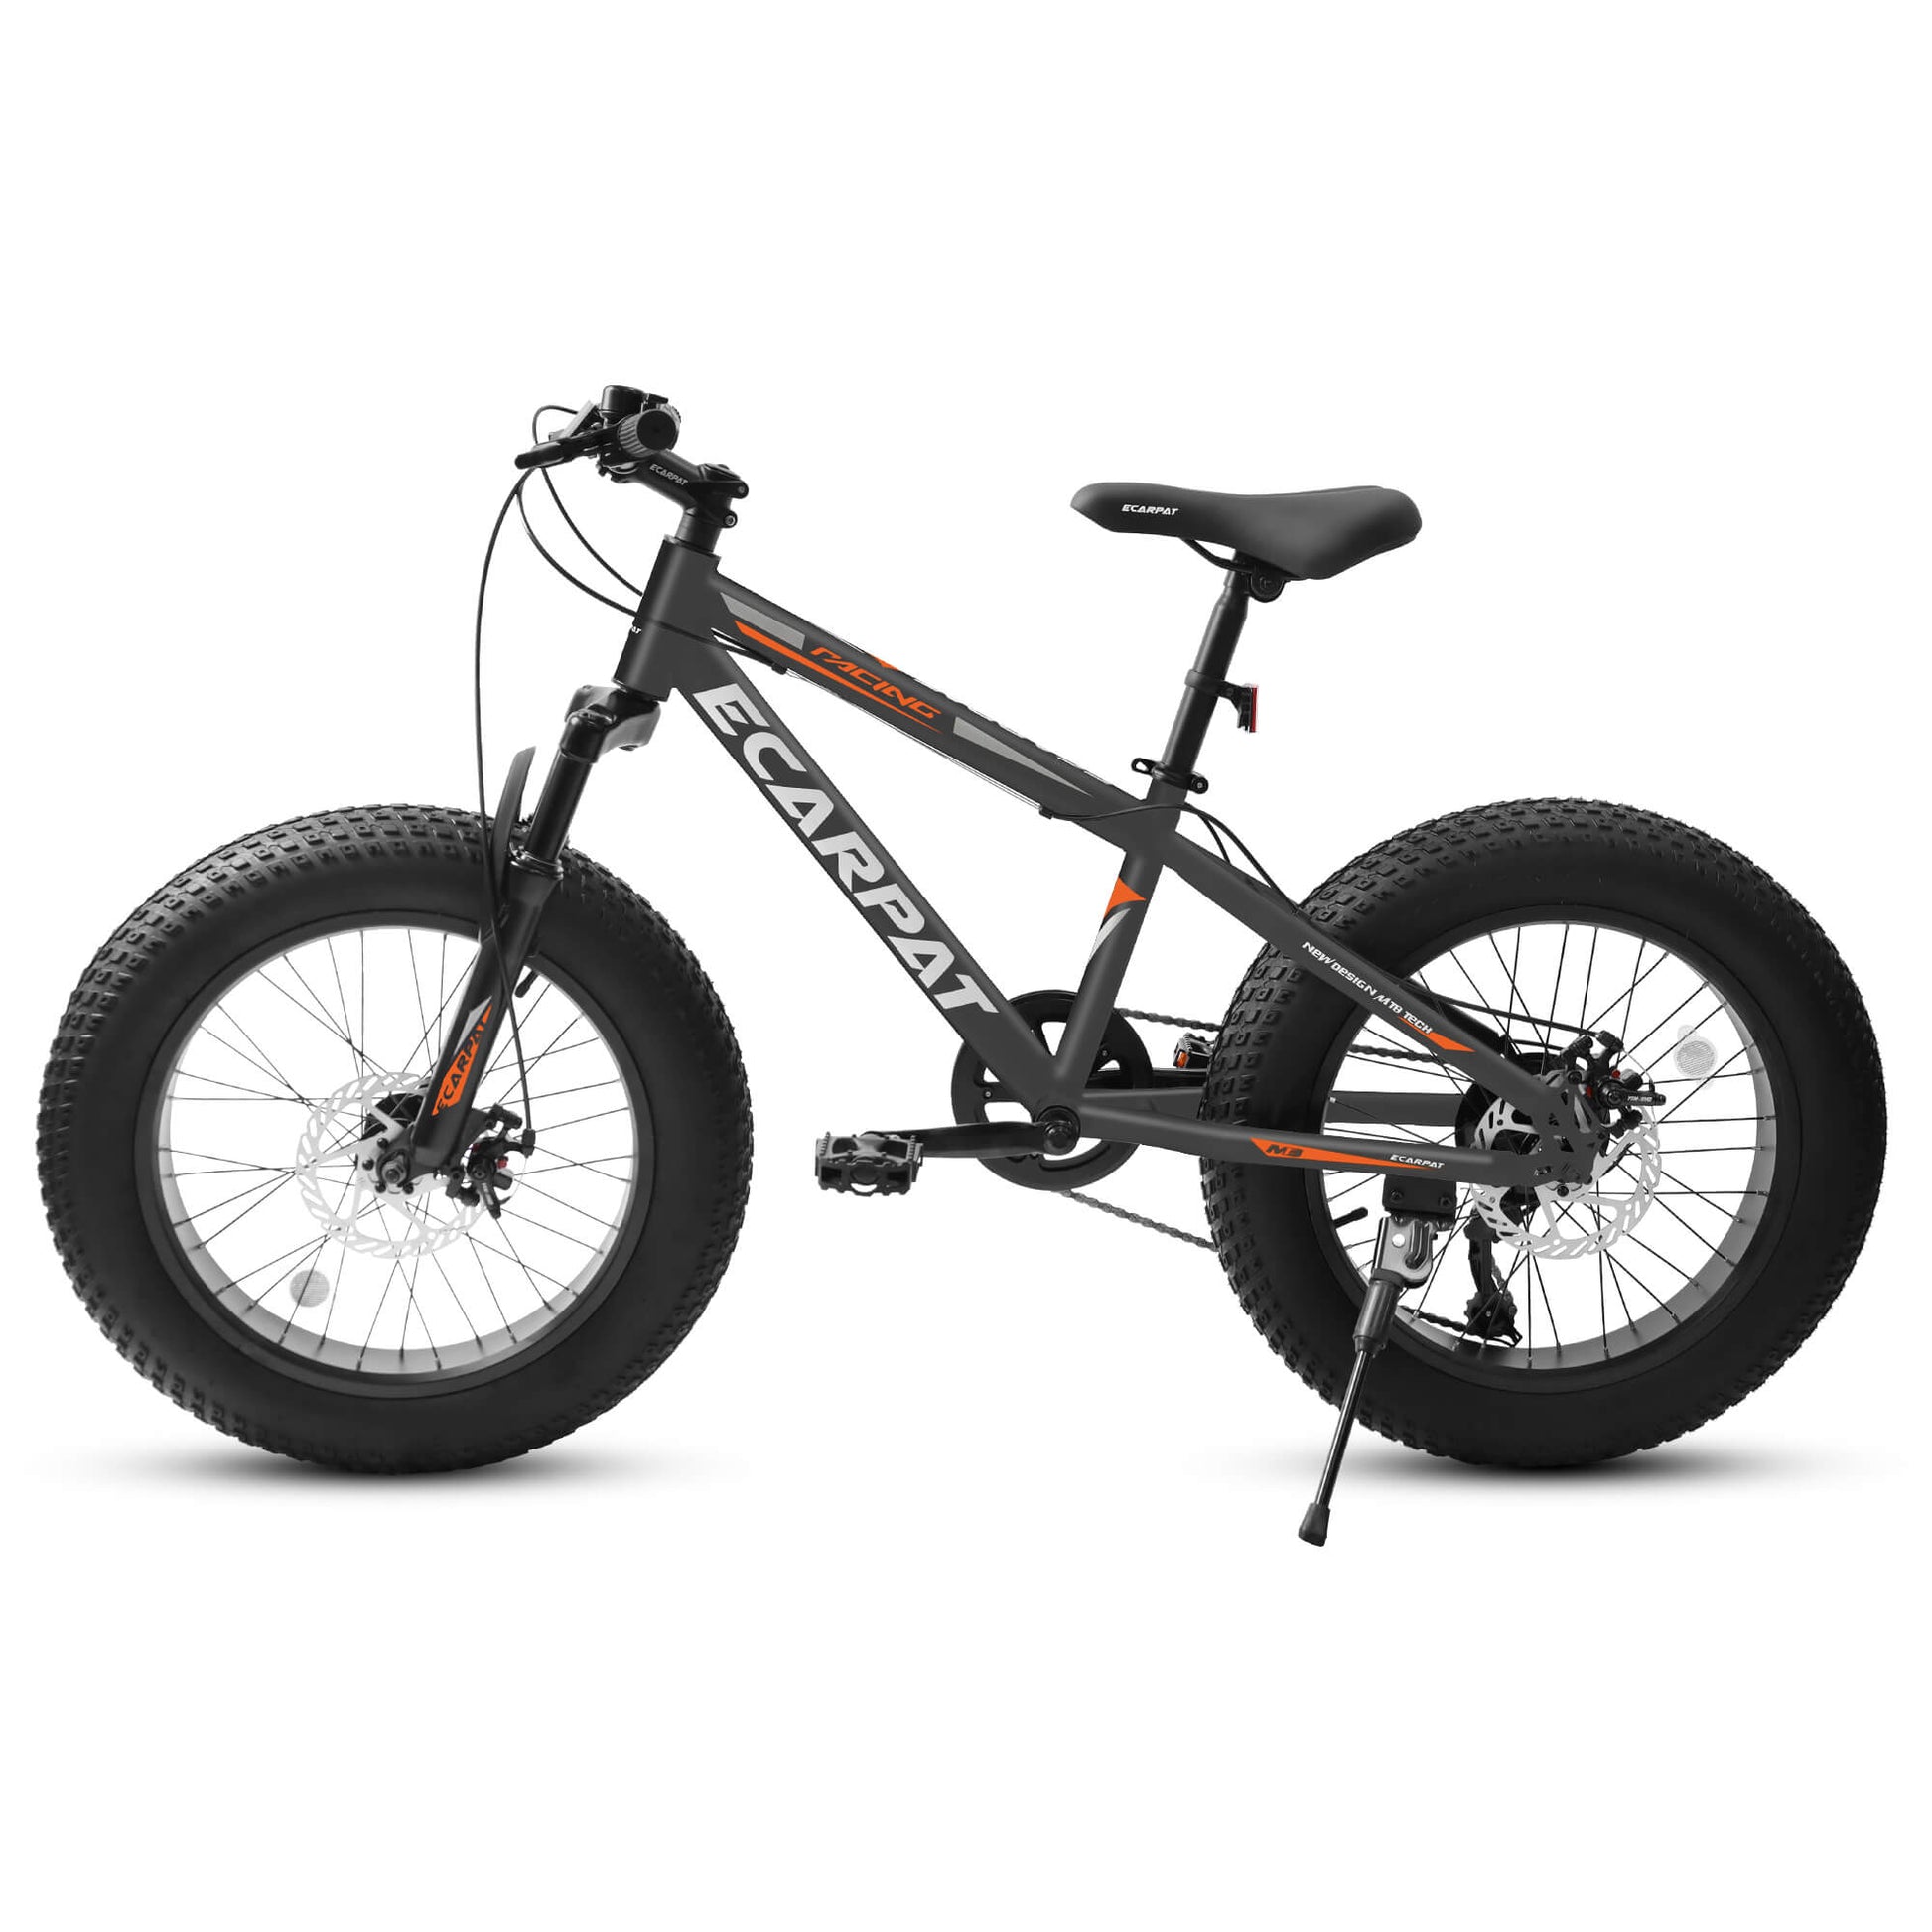 Ecarpat 20"×4.0" carbon steel fat tire bike crafted with a rugged carbon steel frame, front suspension fork and dual disc brake